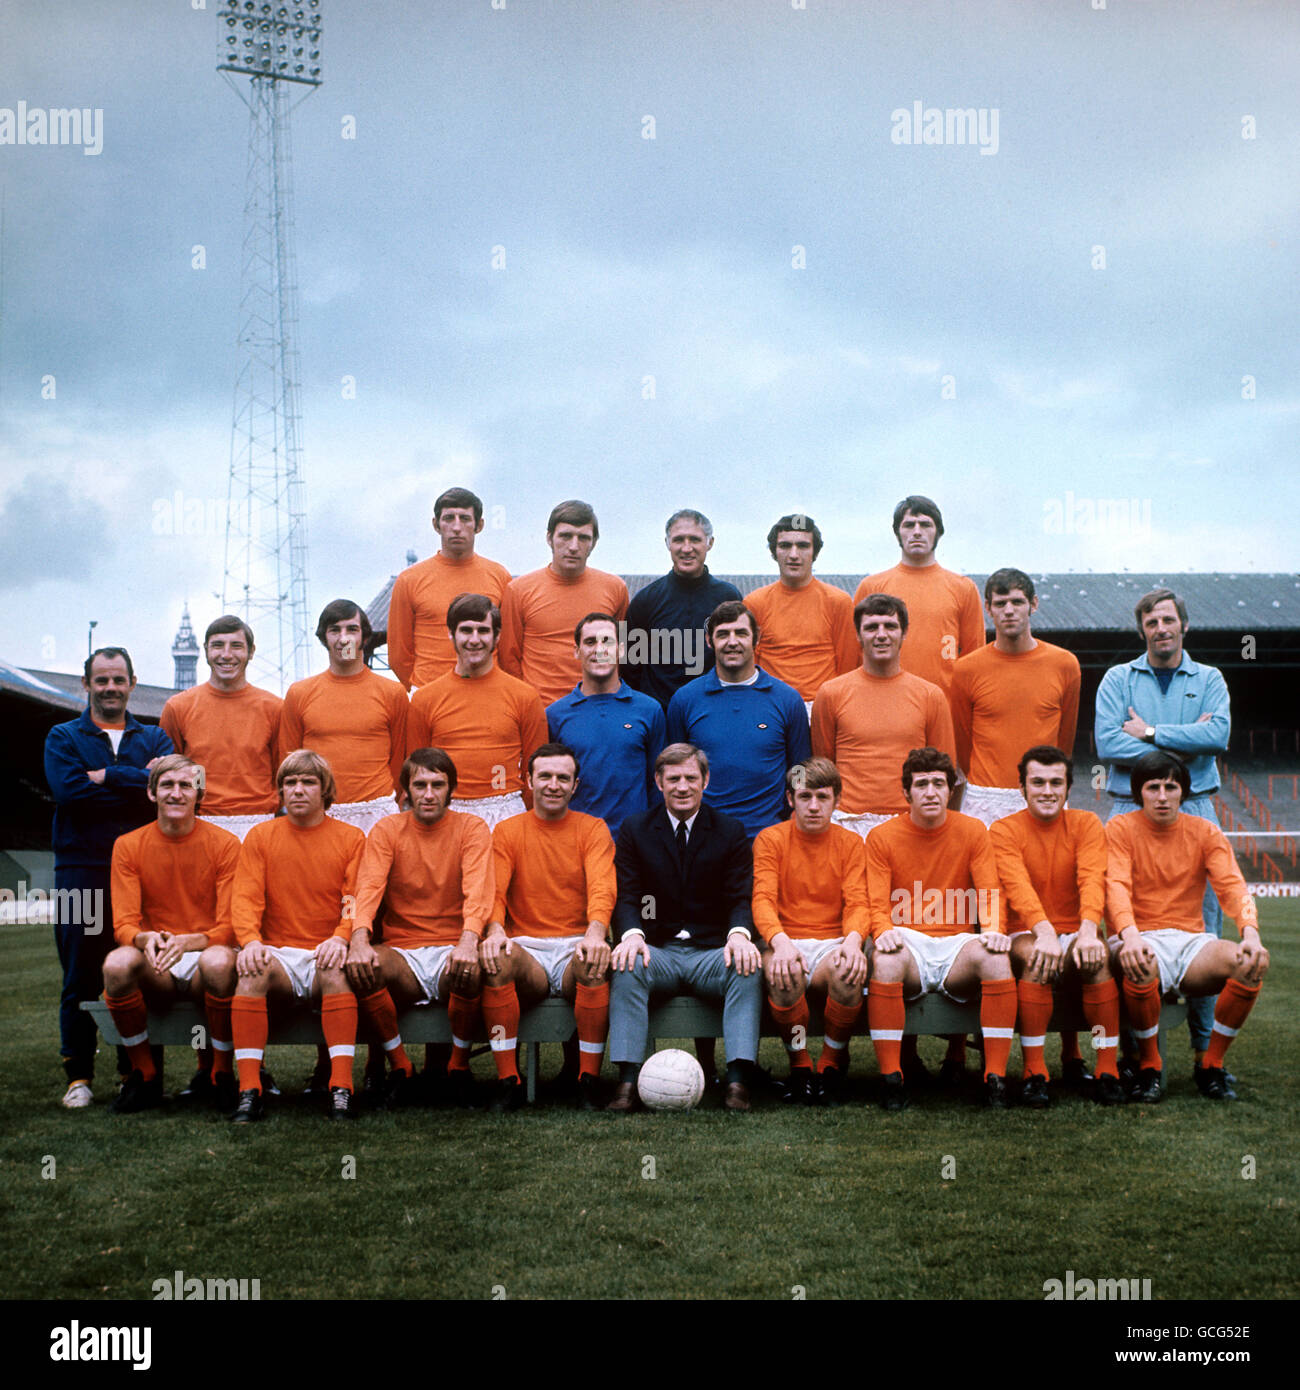 Blackpool F.C. team group, 1970-71. (Back row, L-R) Glyn James, Bill Bentley, trainer, Micky Burns, ? (Middle row, L-R) Trainer, Dave Hatton, Peter Nicholson, Terry Alcock, Harry Thomson, Adam Blacklaw, Fred Pickering, Graham Rowe, trainer. (Front row, L-R) Tommy Hutchison, ? Alan Suddick, Jimmy Armfield, manager Les Shannon, Tony Green, ? ? ? Stock Photo